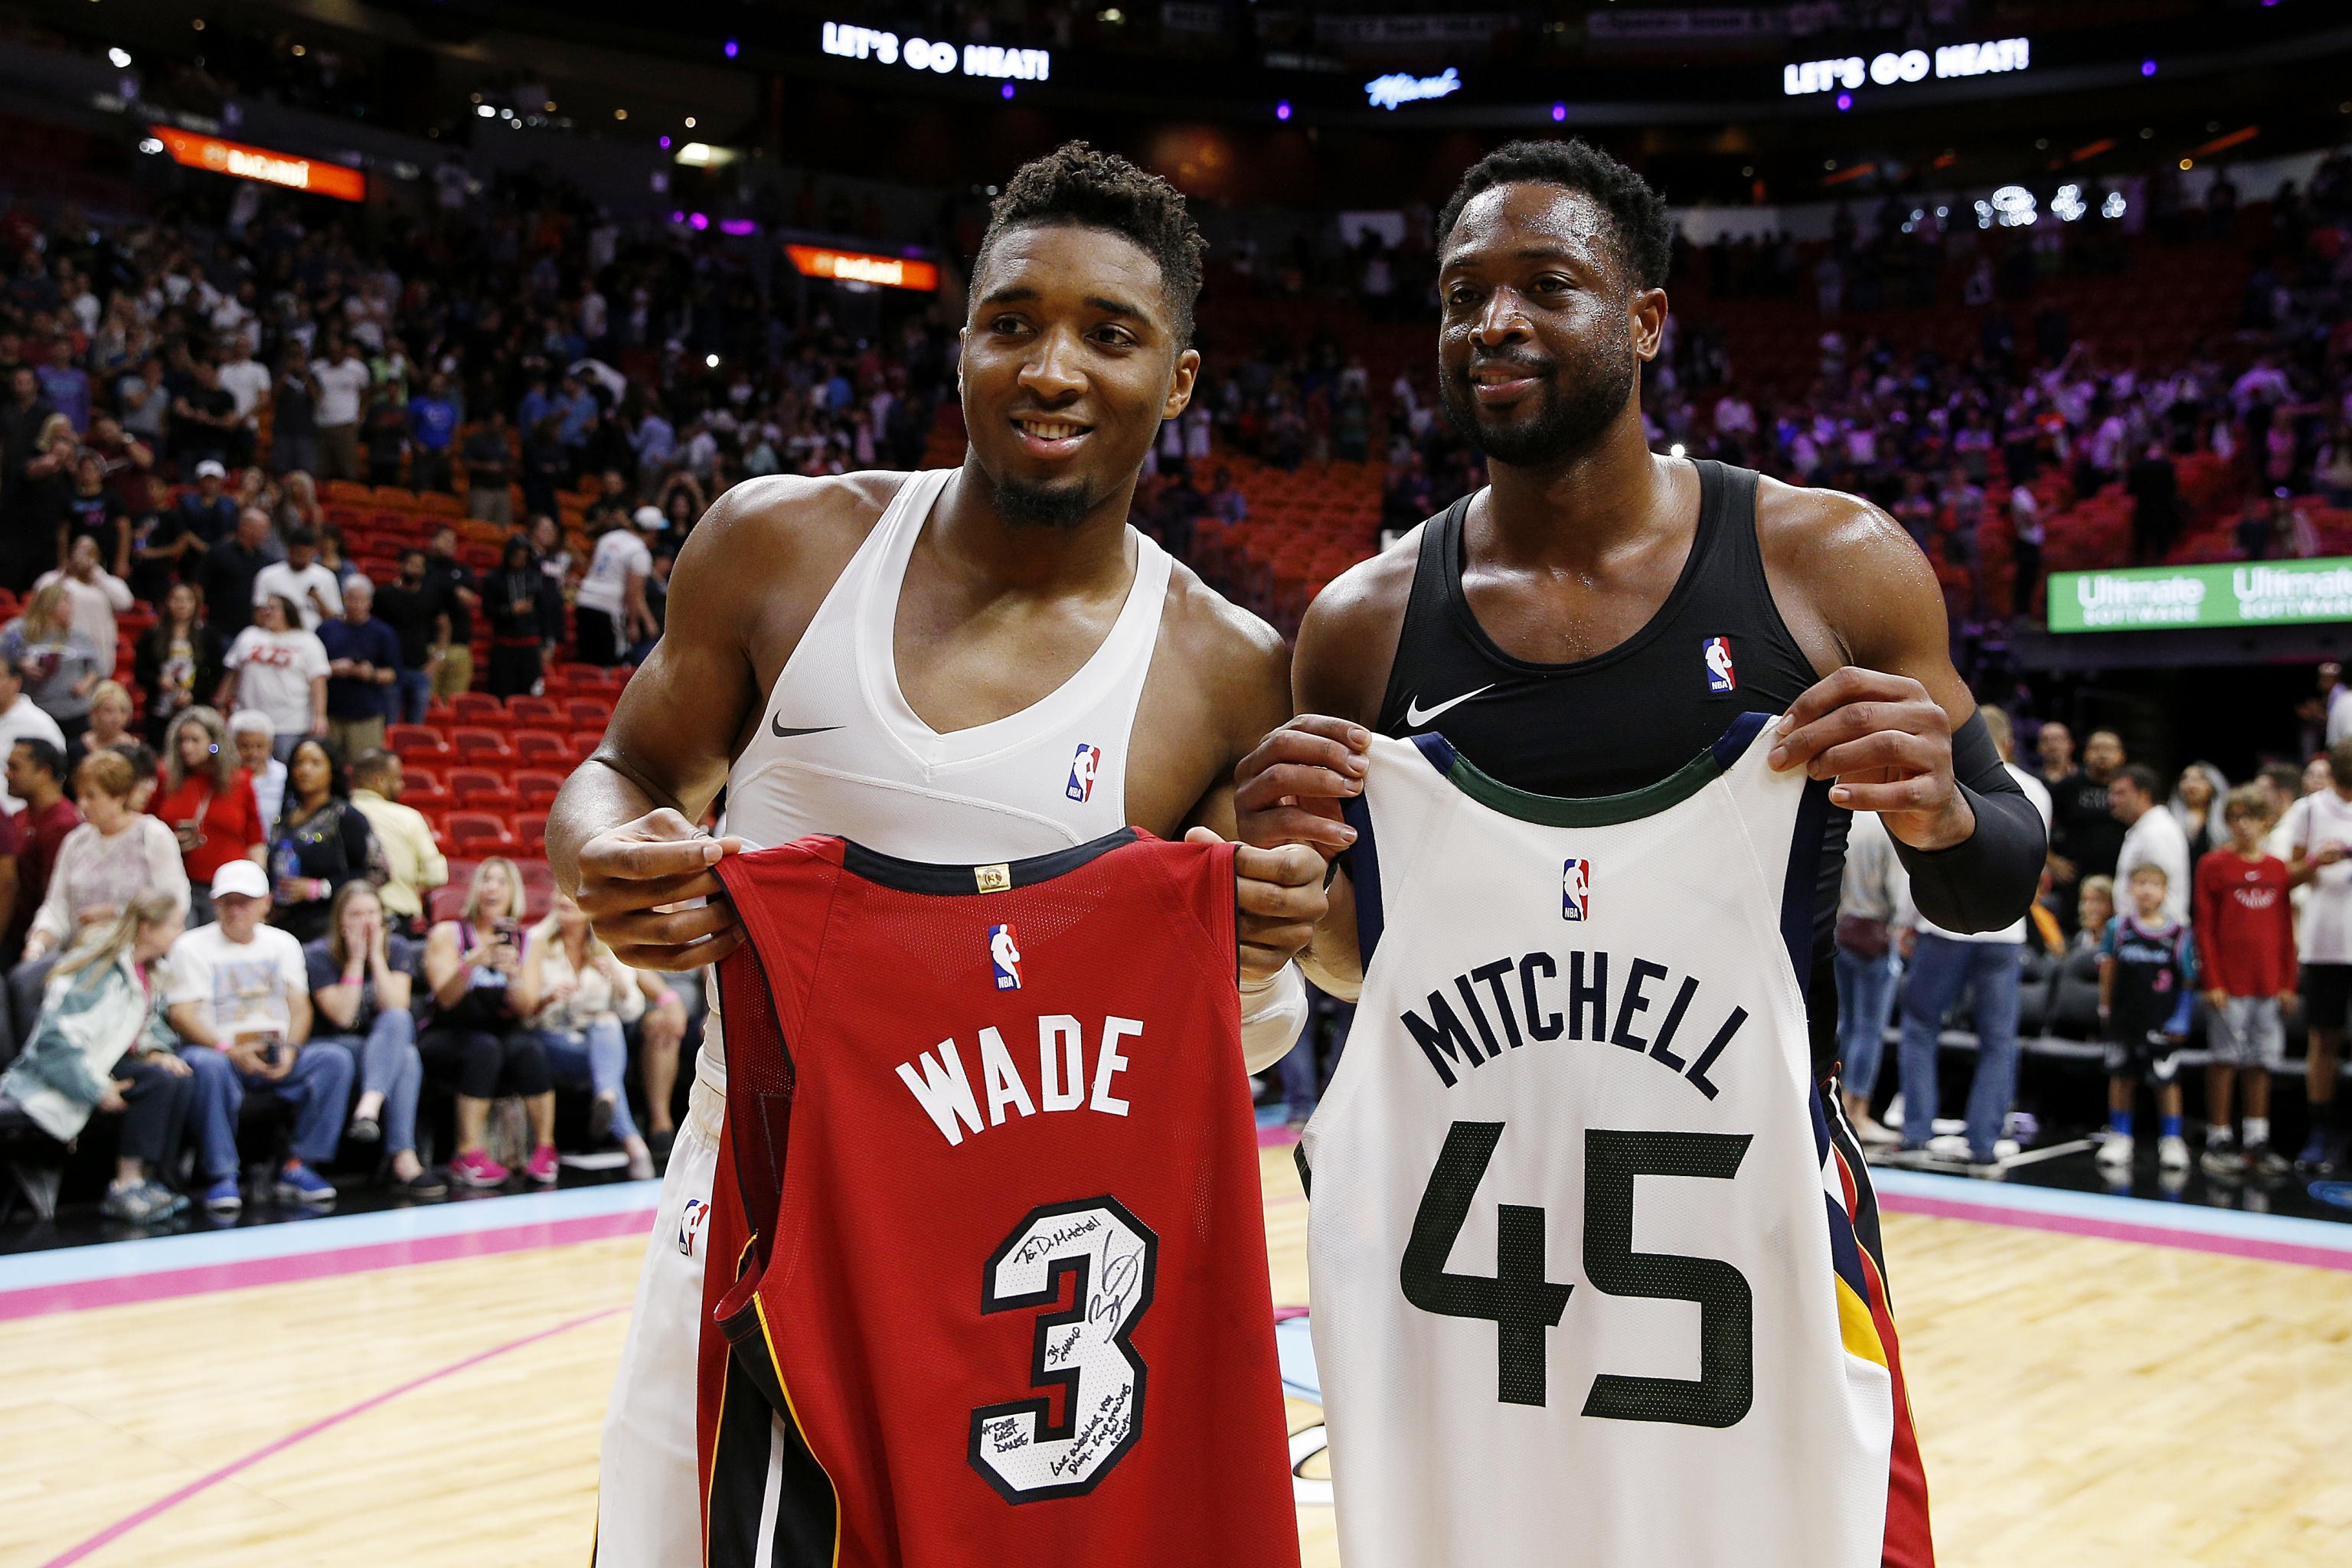 Mitchell: It's great to have Dwyane Wade as part of Jazz